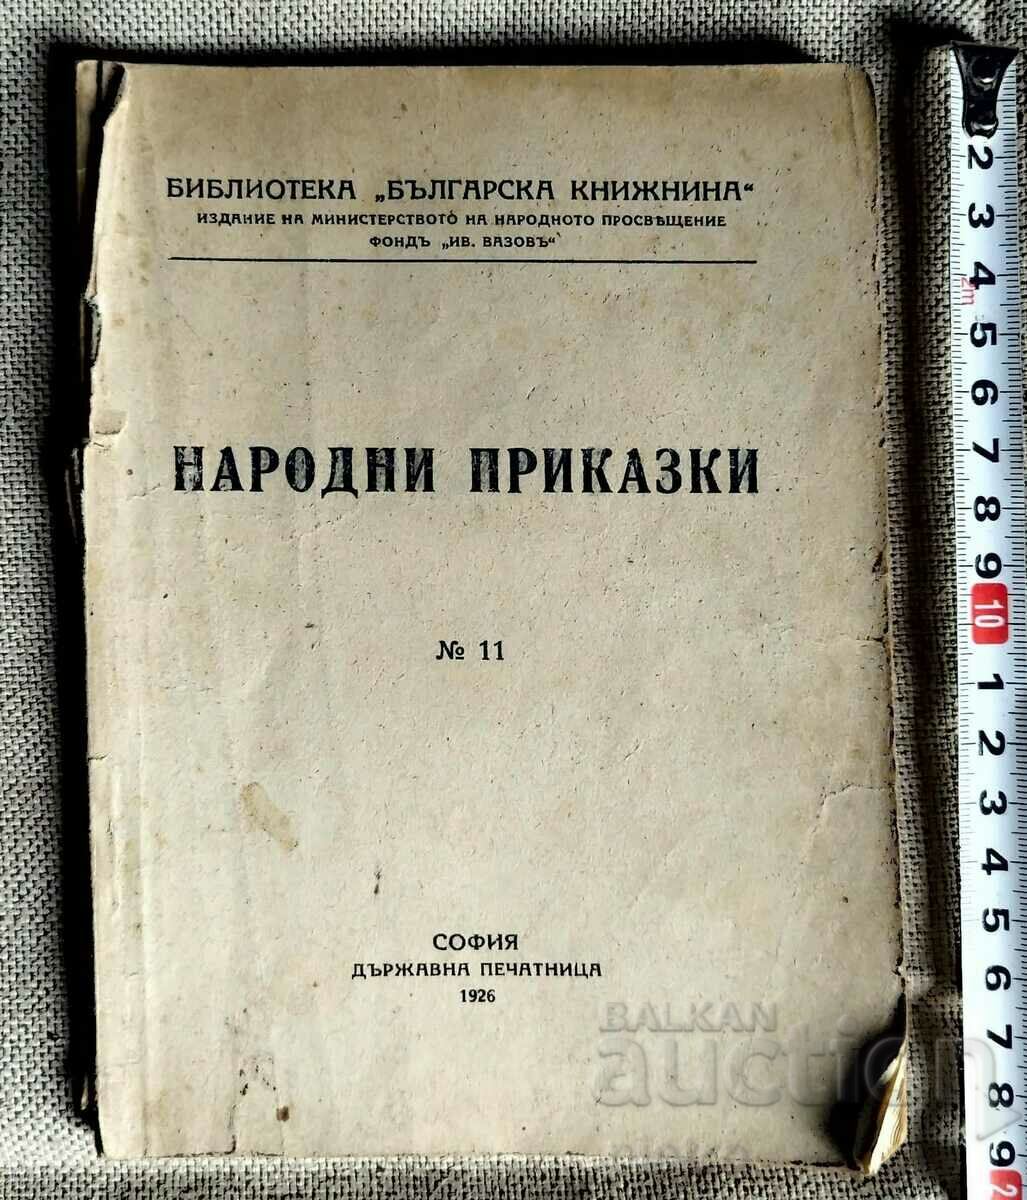 LIBRARY "BULGARIAN LIBRARY" PUBLICATION OF THE MINISTRY...